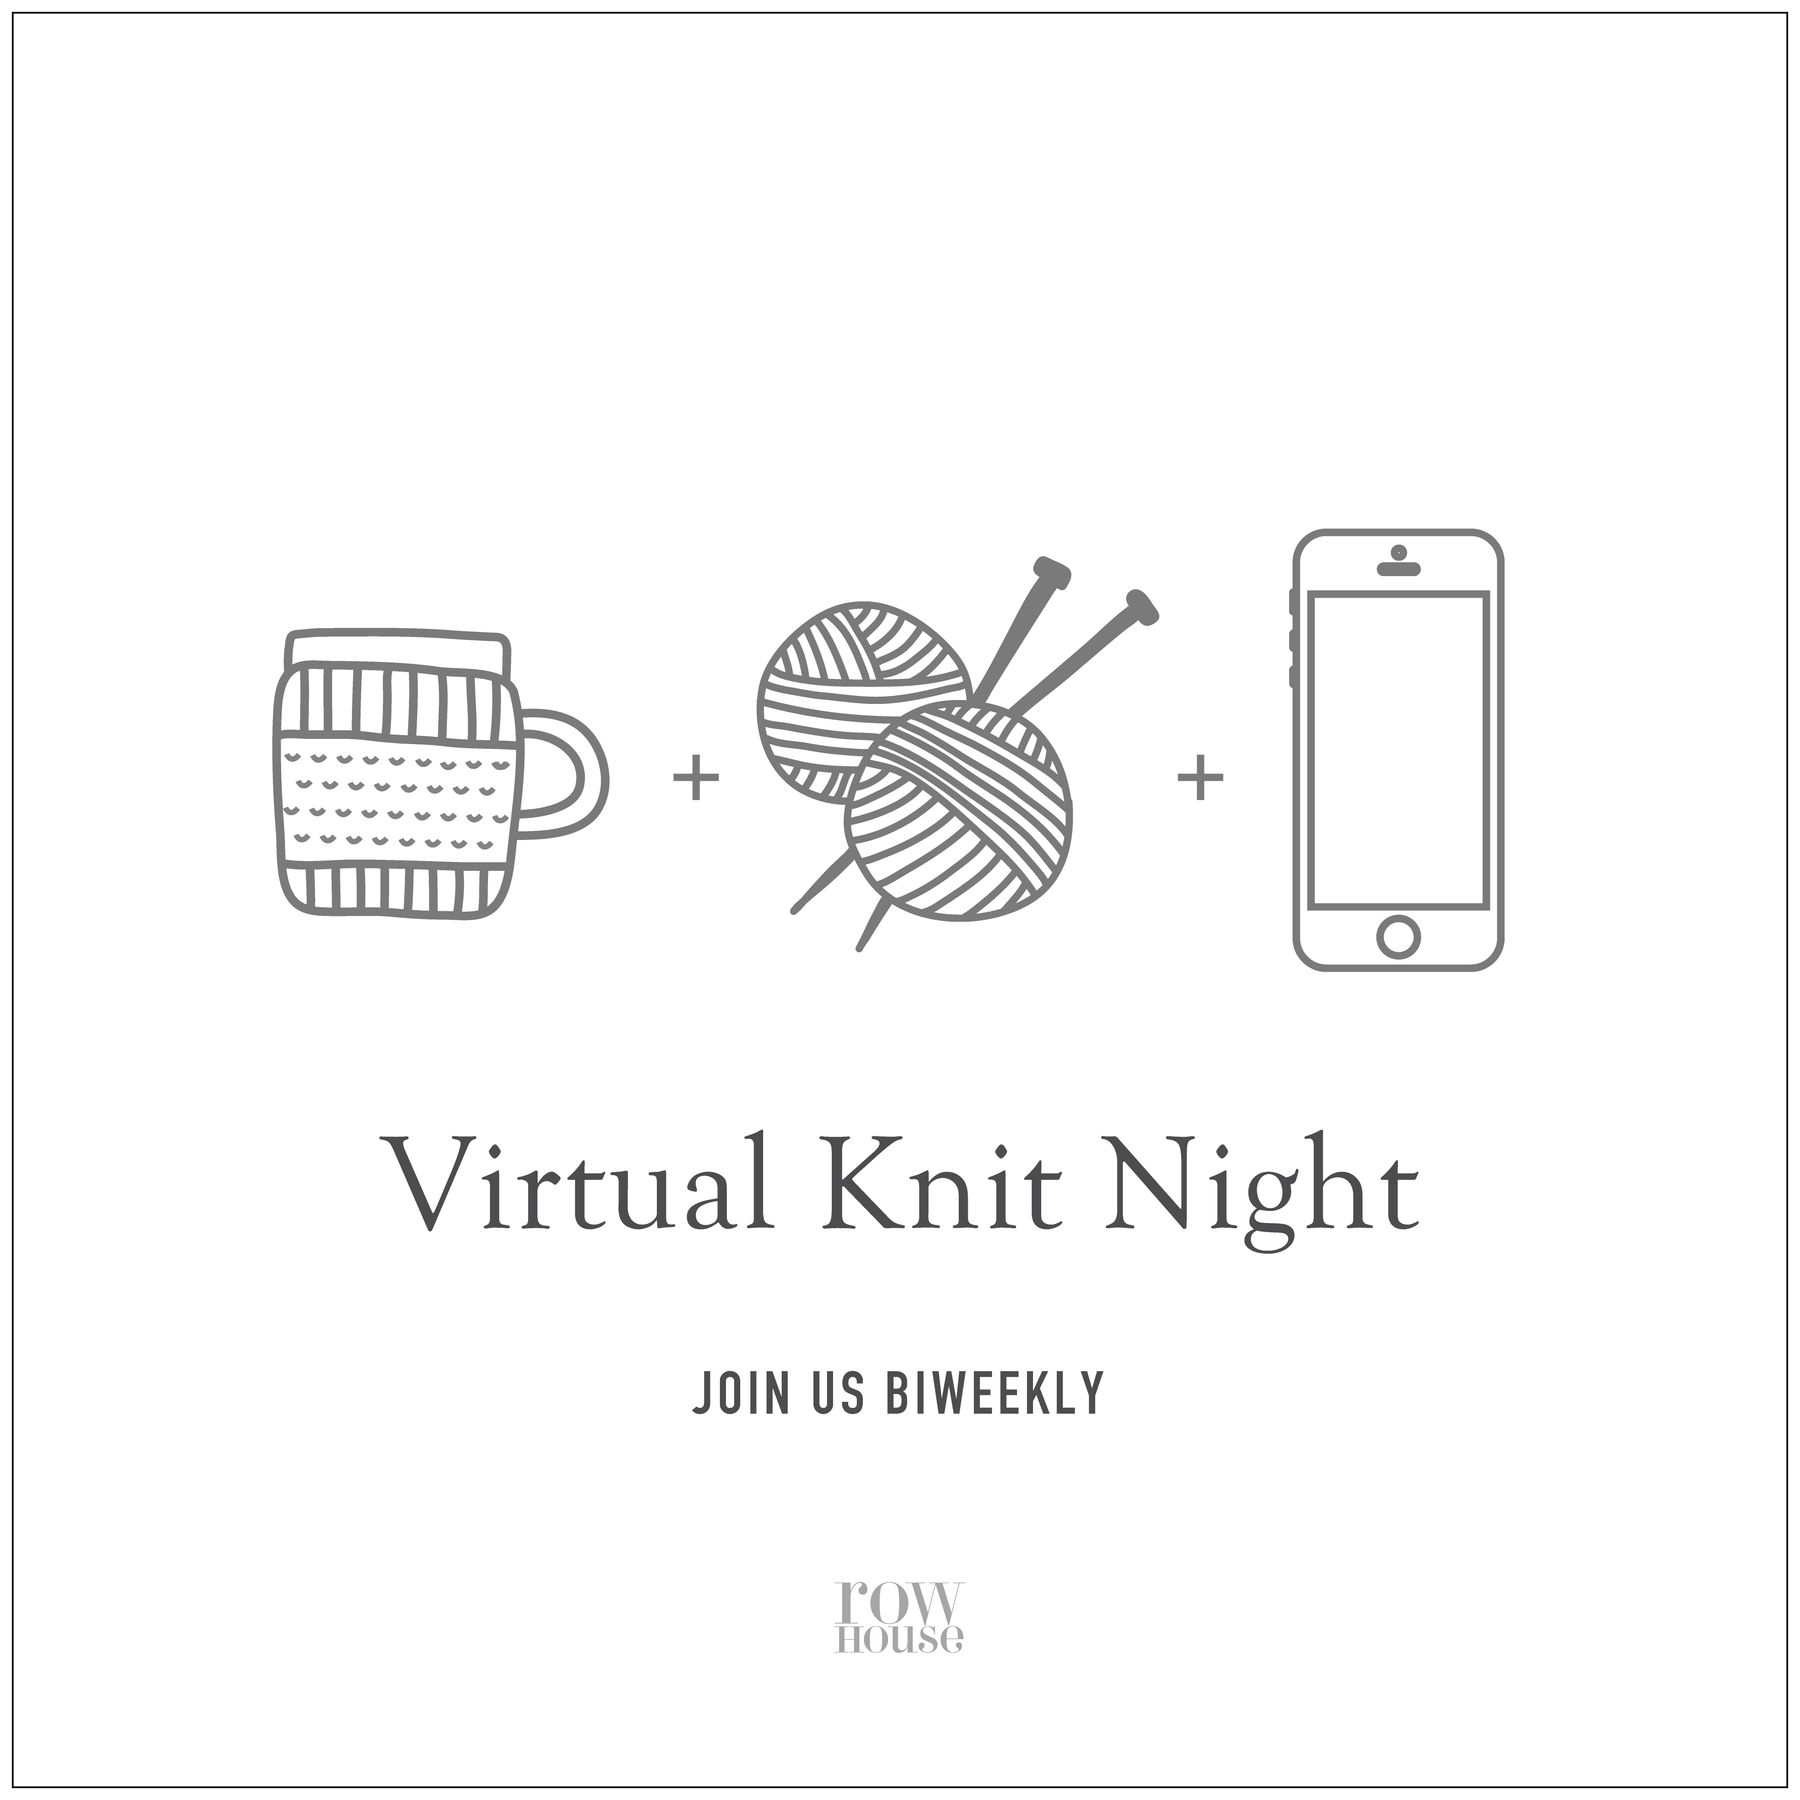 Join us for our Virtual Knit Nights